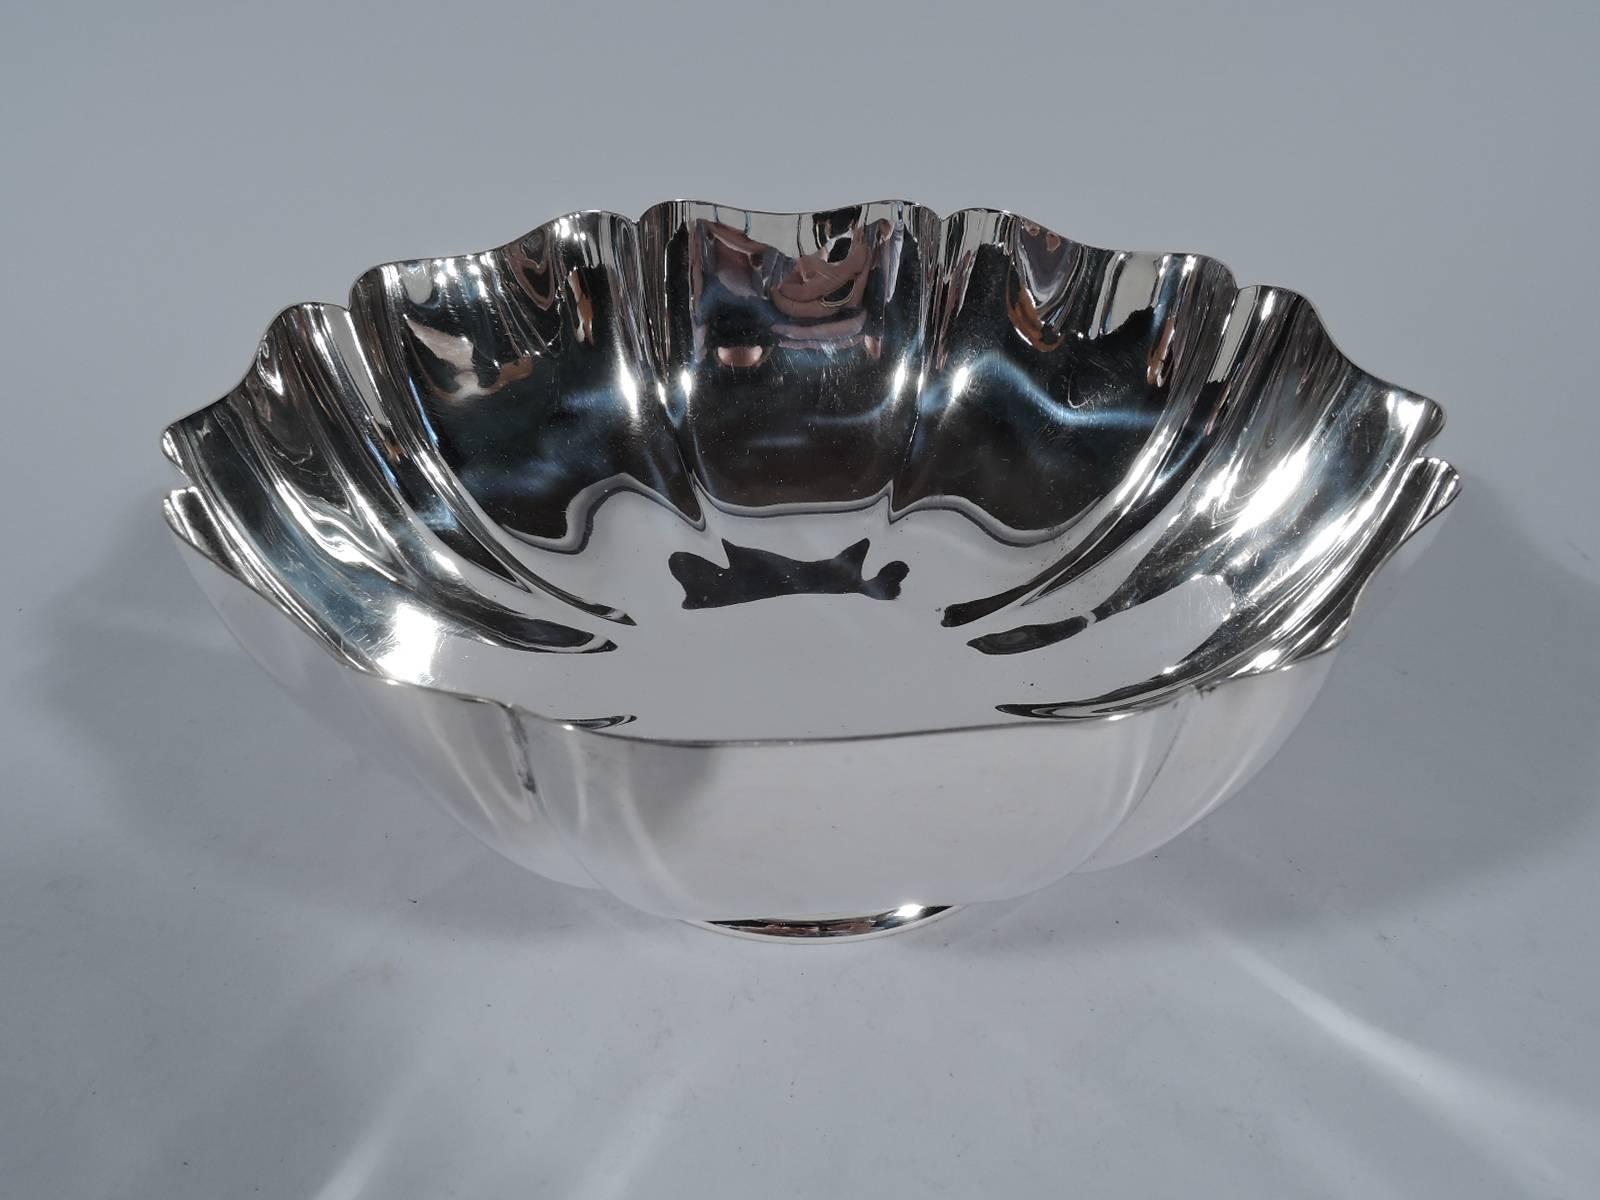 Sterling silver bowl in Standish pattern. Made by Gorham in Providence in 1931. Sides lobed with wavy rim. Stepped foot. Hallmark includes date symbol, pattern name and A12881. Weight: 14.7 troy ounces.